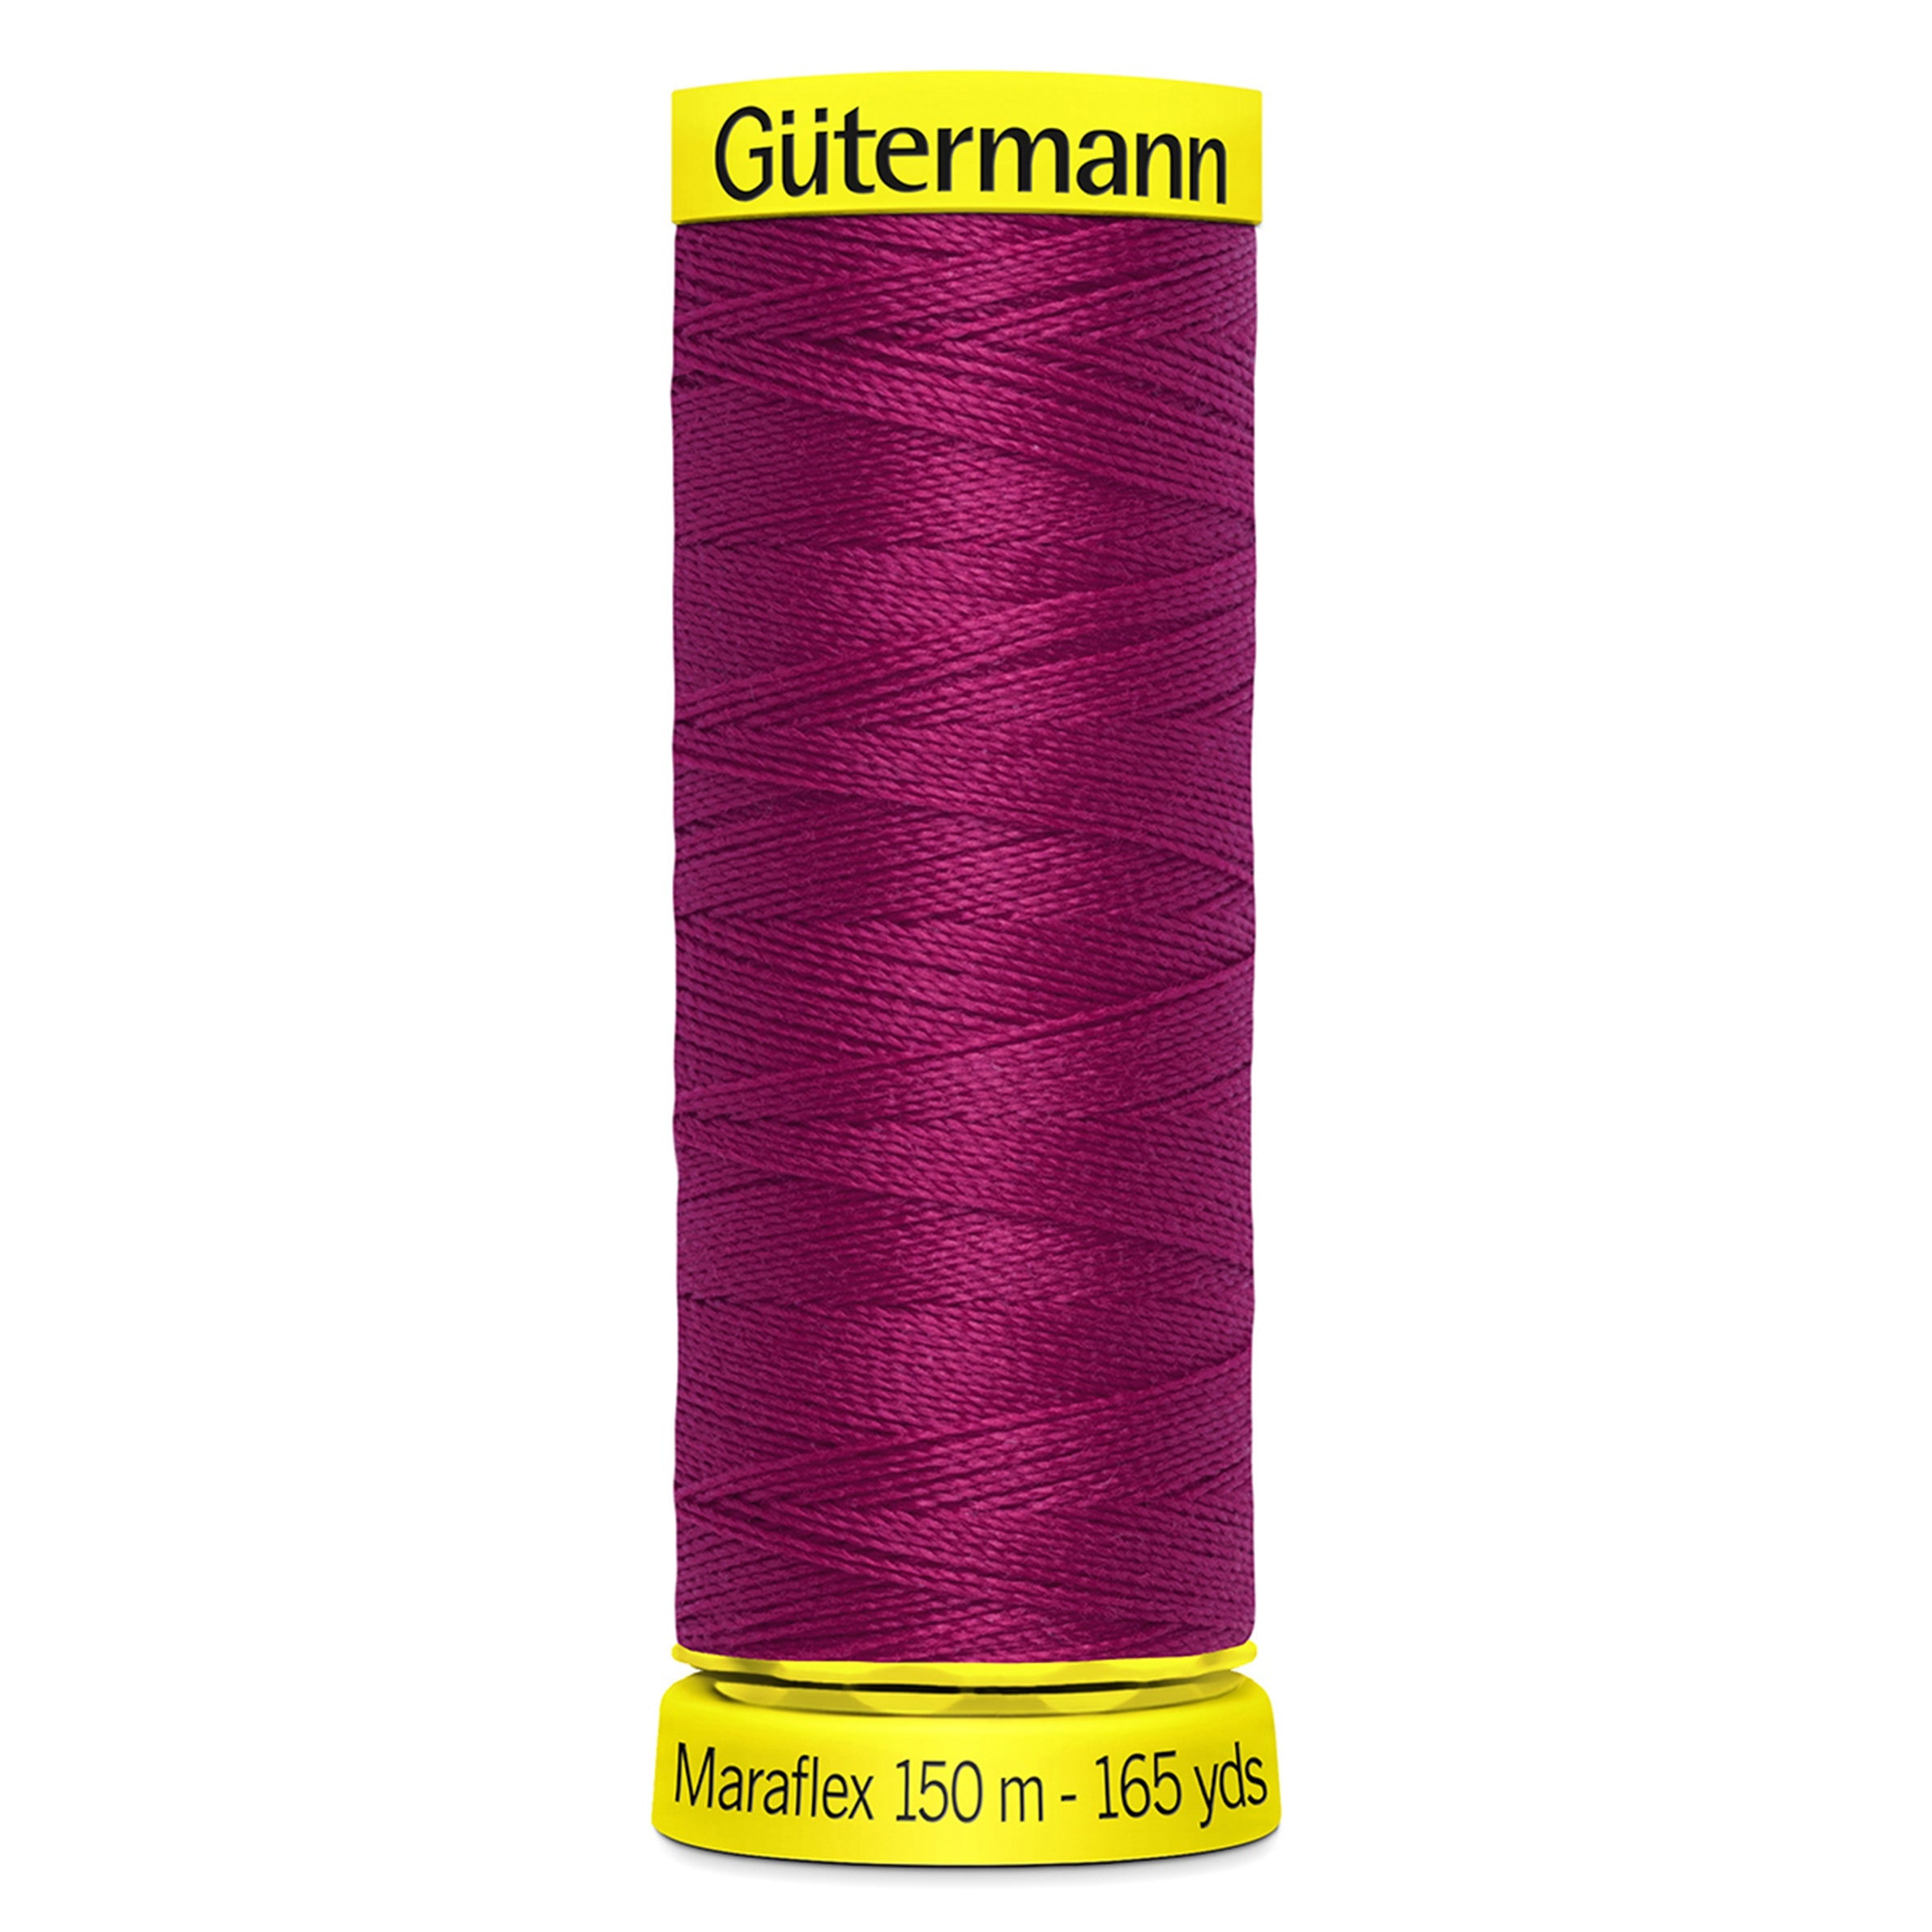 Gutermann Maraflex Stretchy Sewing Thread 150m colour 384 from Jaycotts Sewing Supplies